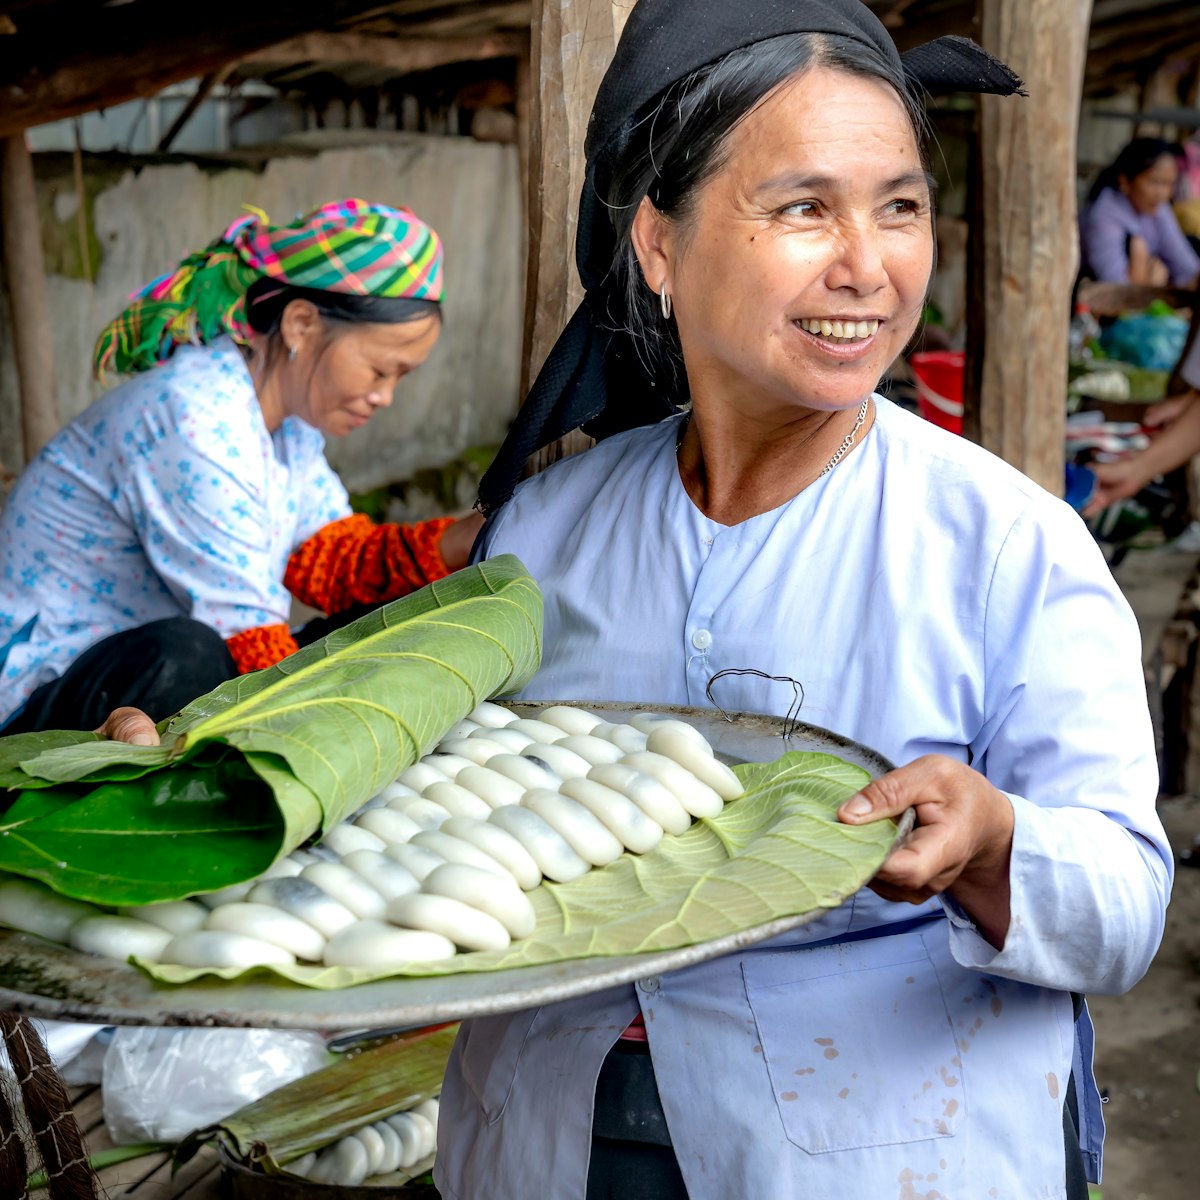 Lang Son province, Vietnam. the beauty of a rural woman selling homemade rice cakes filled with black sugar at the market.